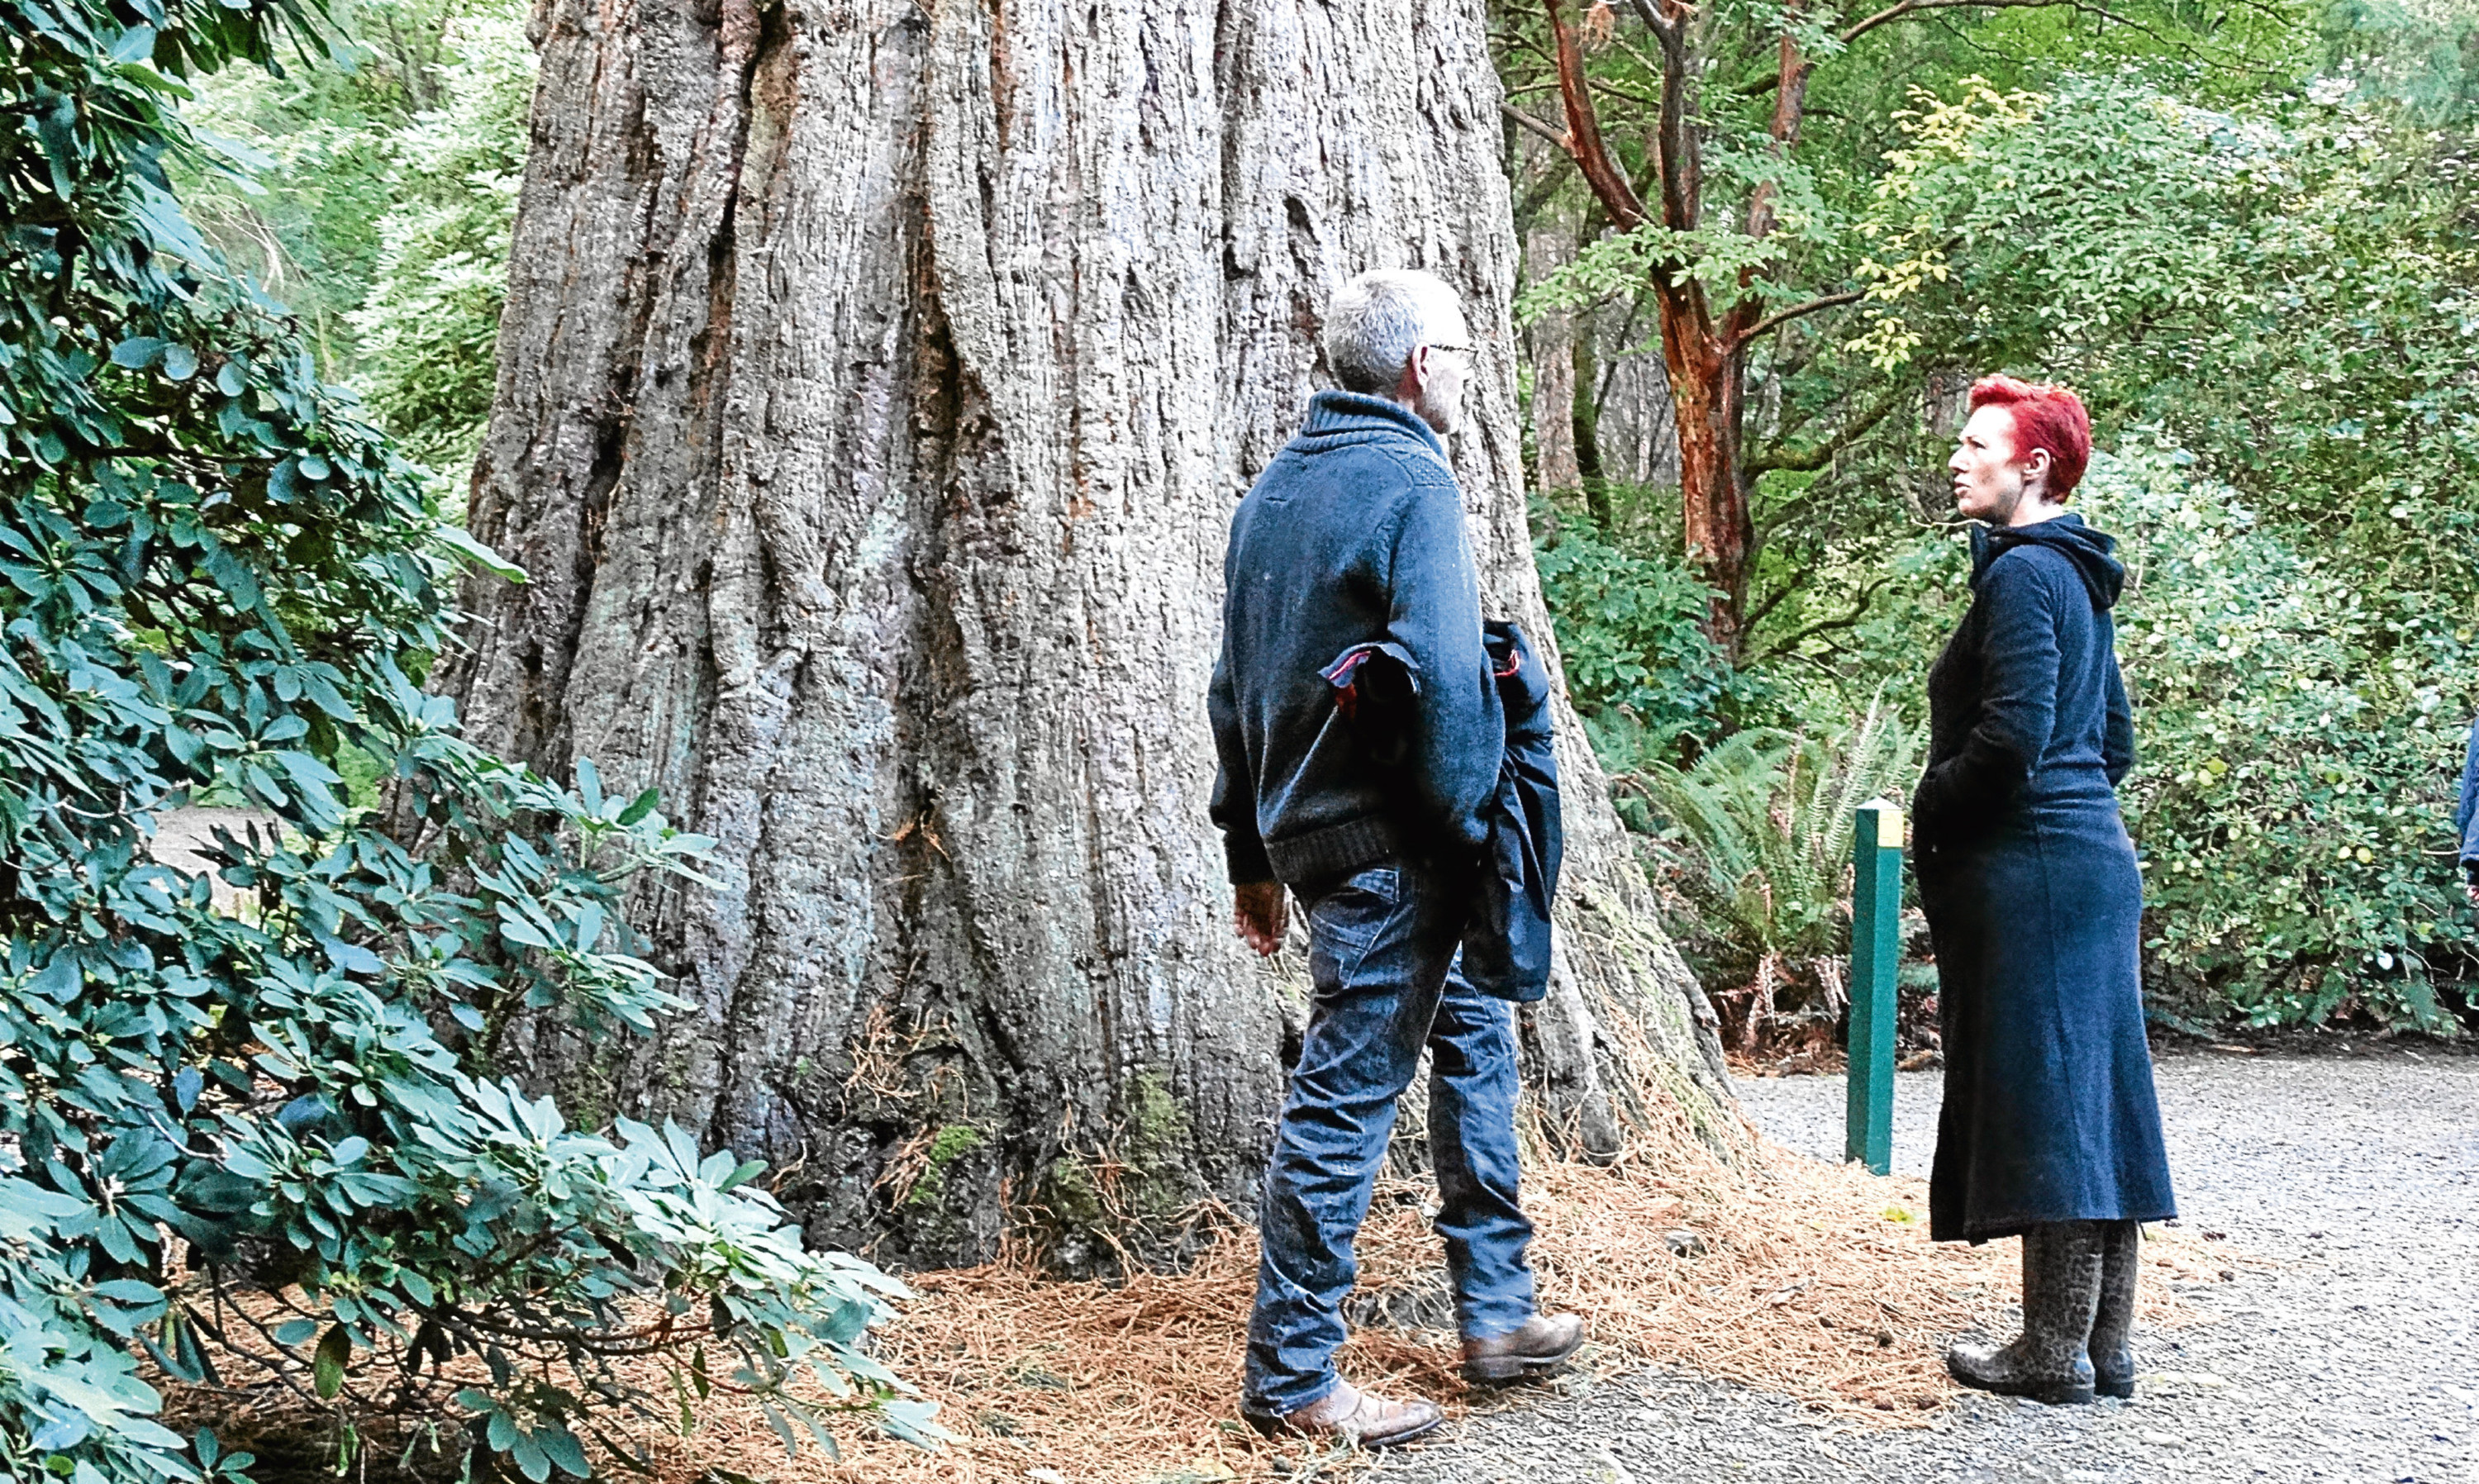 Angus's son James and his wife Harriet admiring the giant redwood at Dawyck Botanic Garden in the Borders.